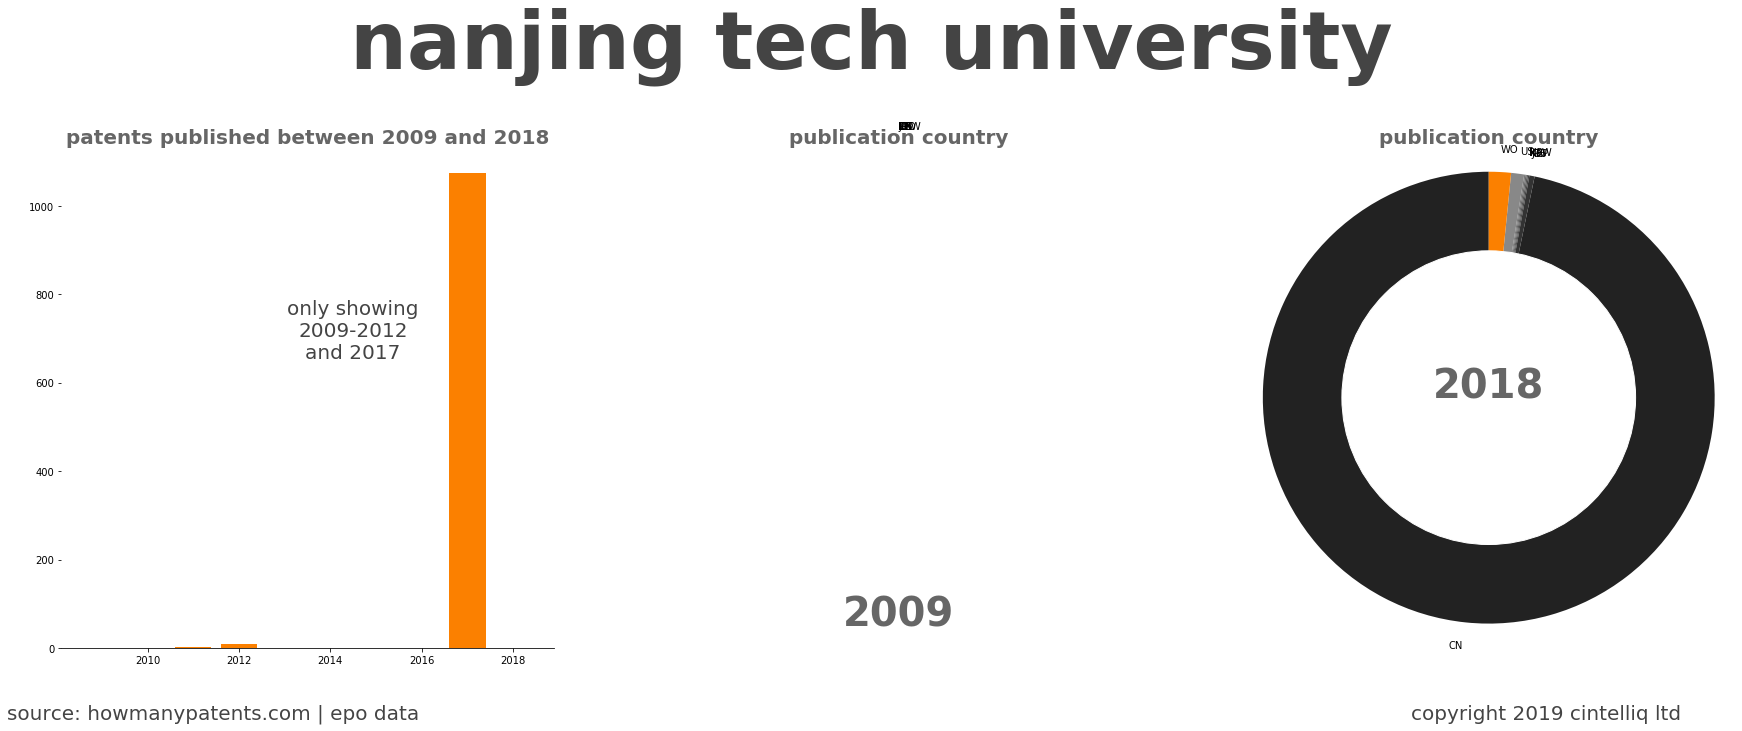 summary of patents for Nanjing Tech University